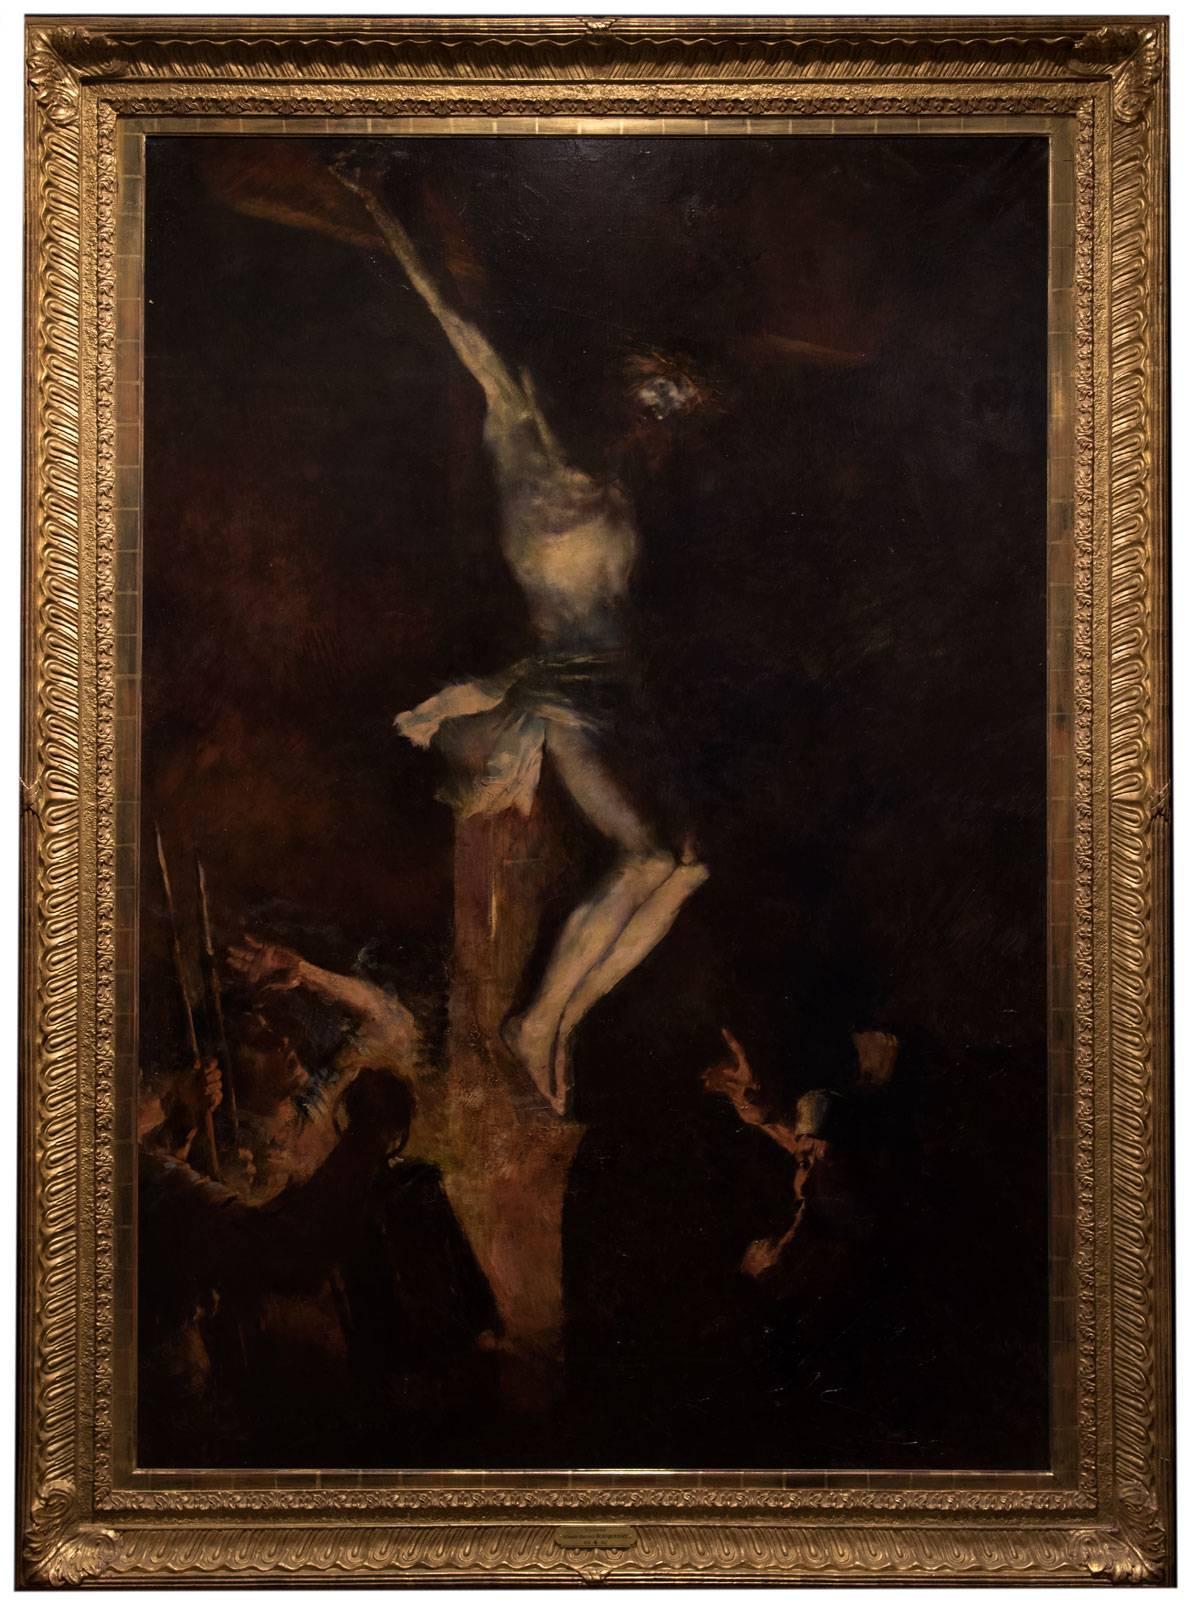 Lit from below, Christ is hauntingly depicted hanging from the cross, his skin sallow and grey in death. Roman soldiers surround the cross at its base, the light from the lantern illuminating their surprised and aghast expressions as they look upon